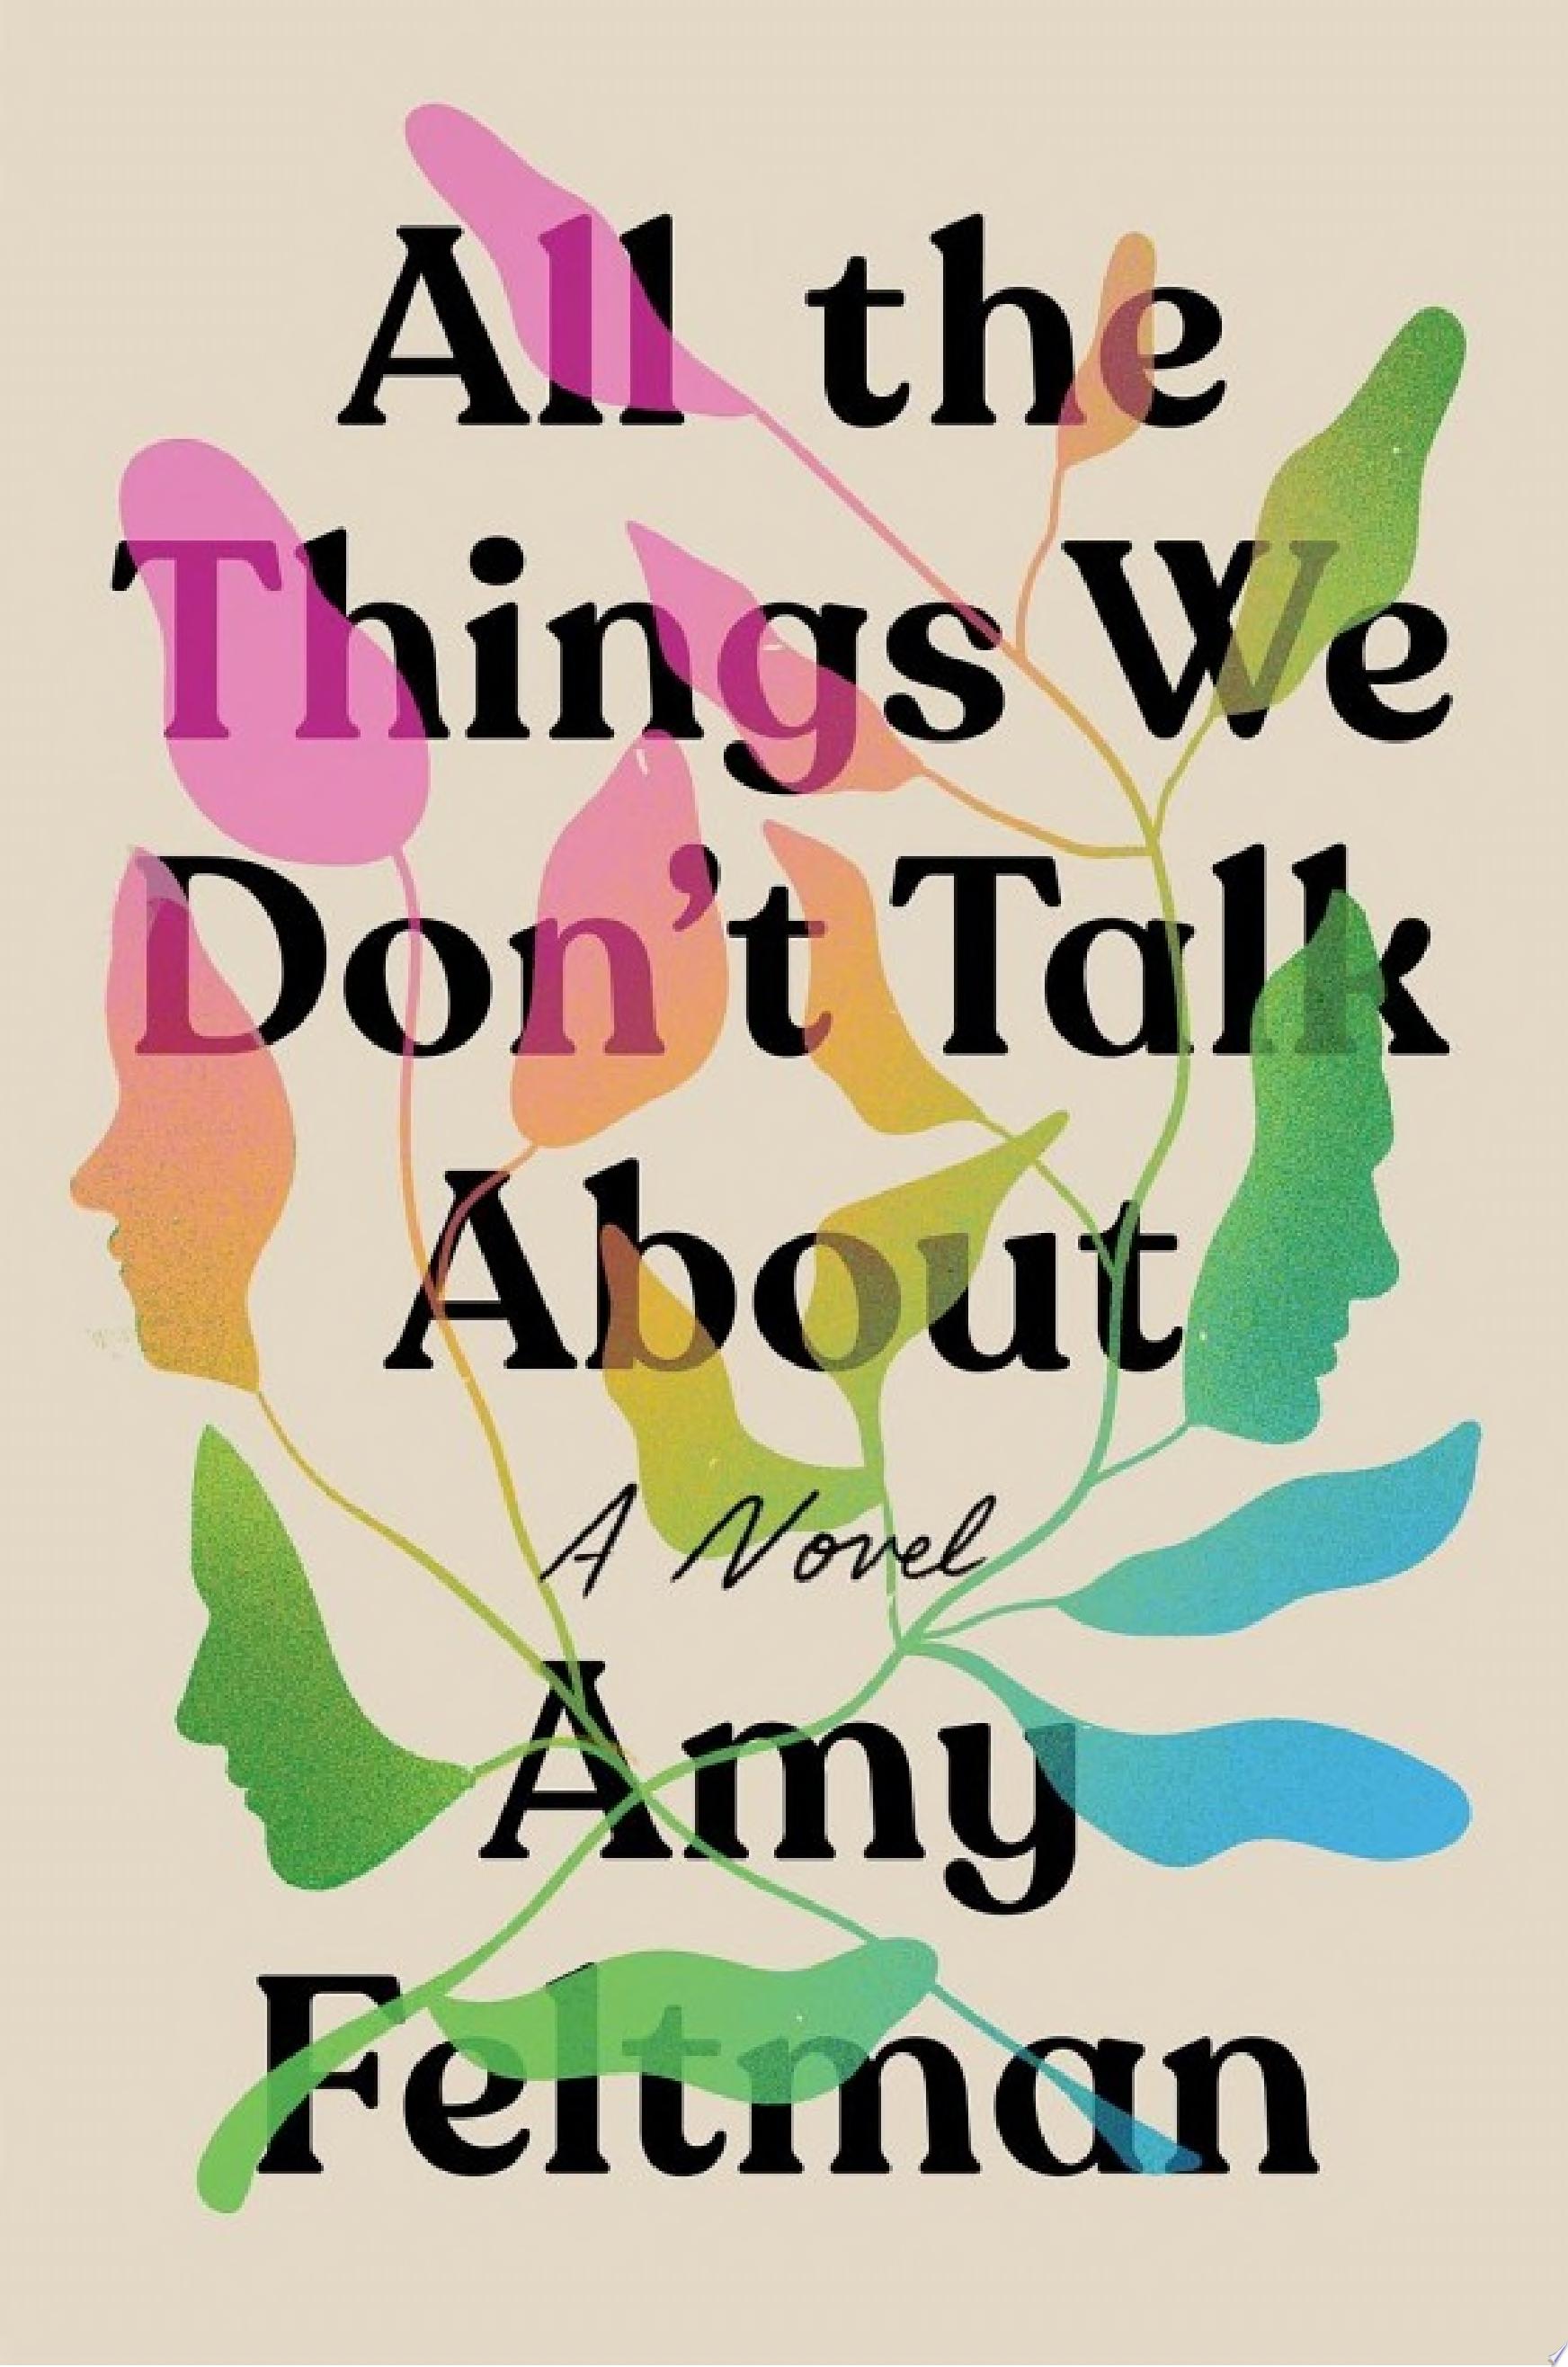 Image for "All the Things We Don't Talk About"